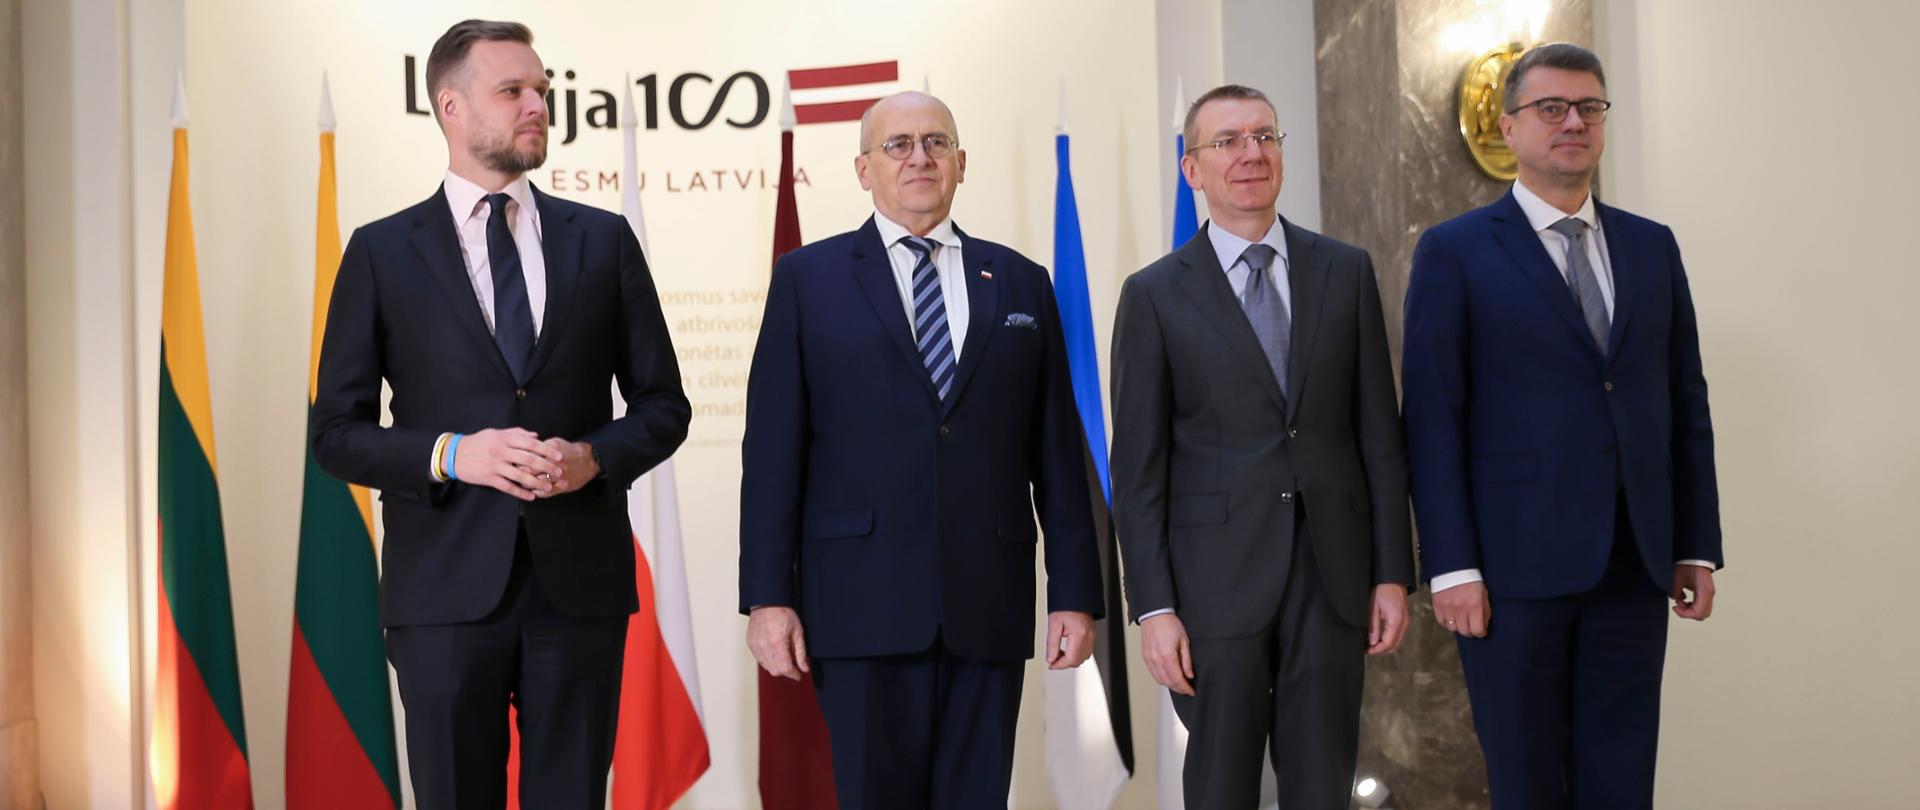 Minister Rau's visit to Riga with the Ministers of Foreign Affairs of the Baltic States